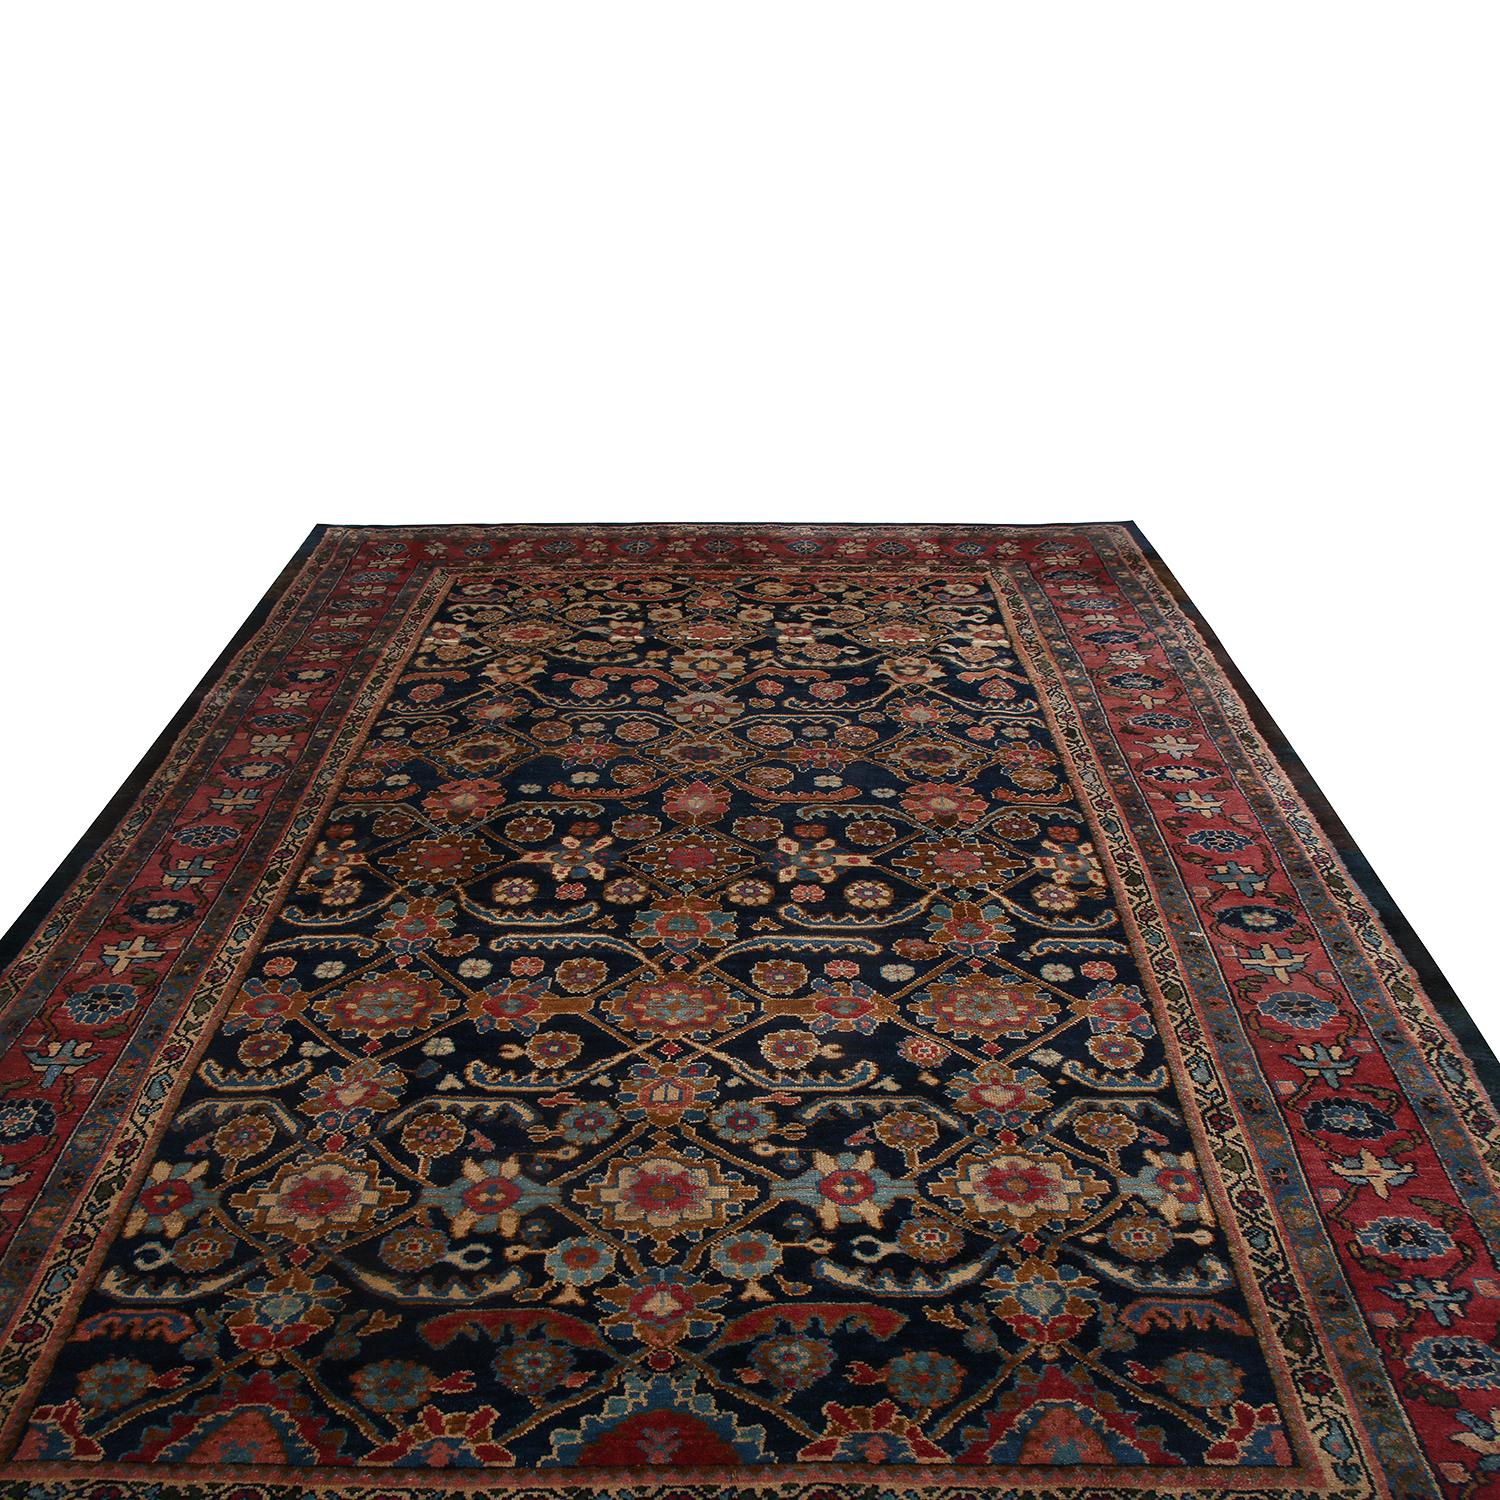 Hand knotted in Persia originating between 1880-1890, this antique geometric-floral rug hails from the city of Hamadan, enjoying distinct geometric-floral patterns with an equally individualistic, complementary colorway. The navy blue background